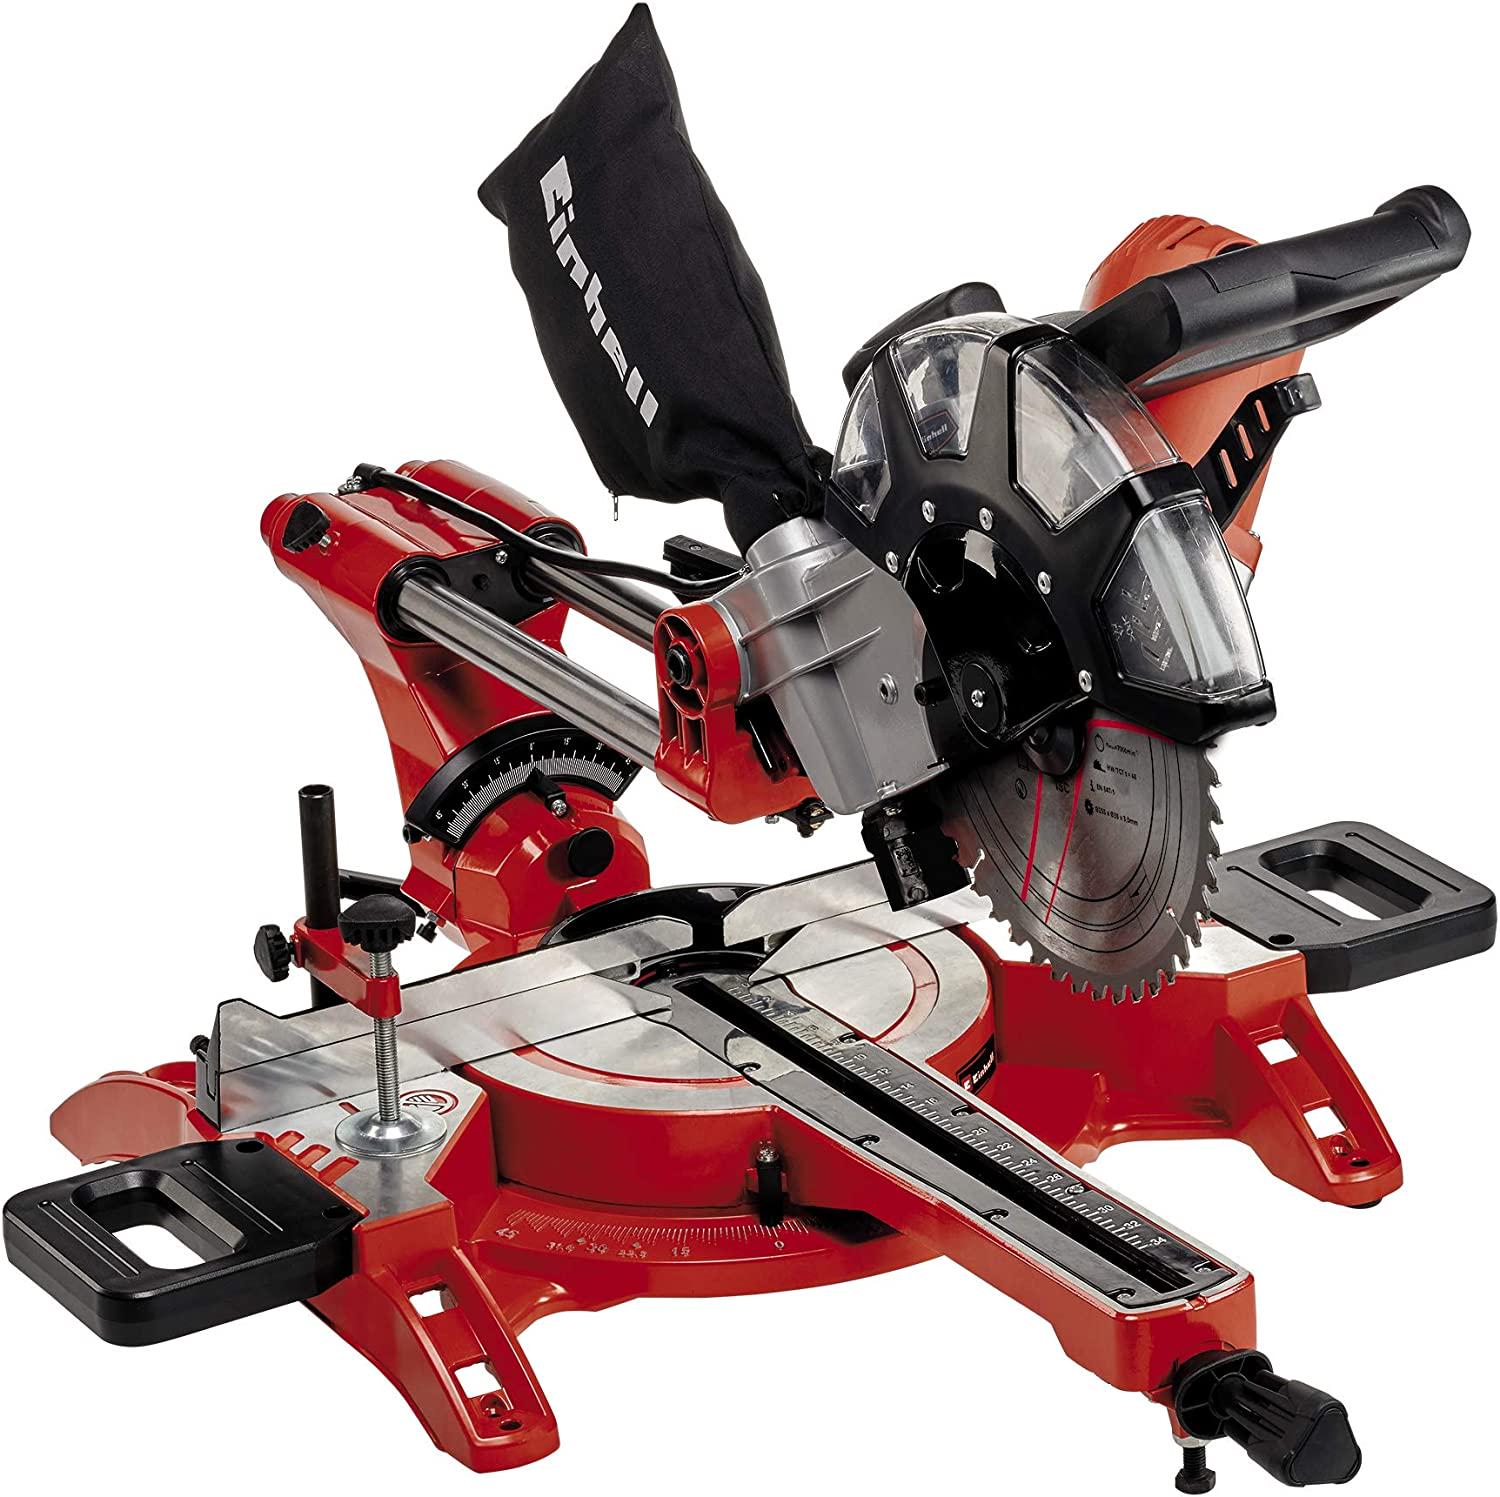 Einhell, Einhell 4300395 Dual Drag, Crosscut and Miter Saw TC-SM 2534/1 (Maximum 2350 W, Integrated Drag Function, Saw Head Tilts to Left/Right, Laser, Include Carbide-Tipped Precision Saw Blade)